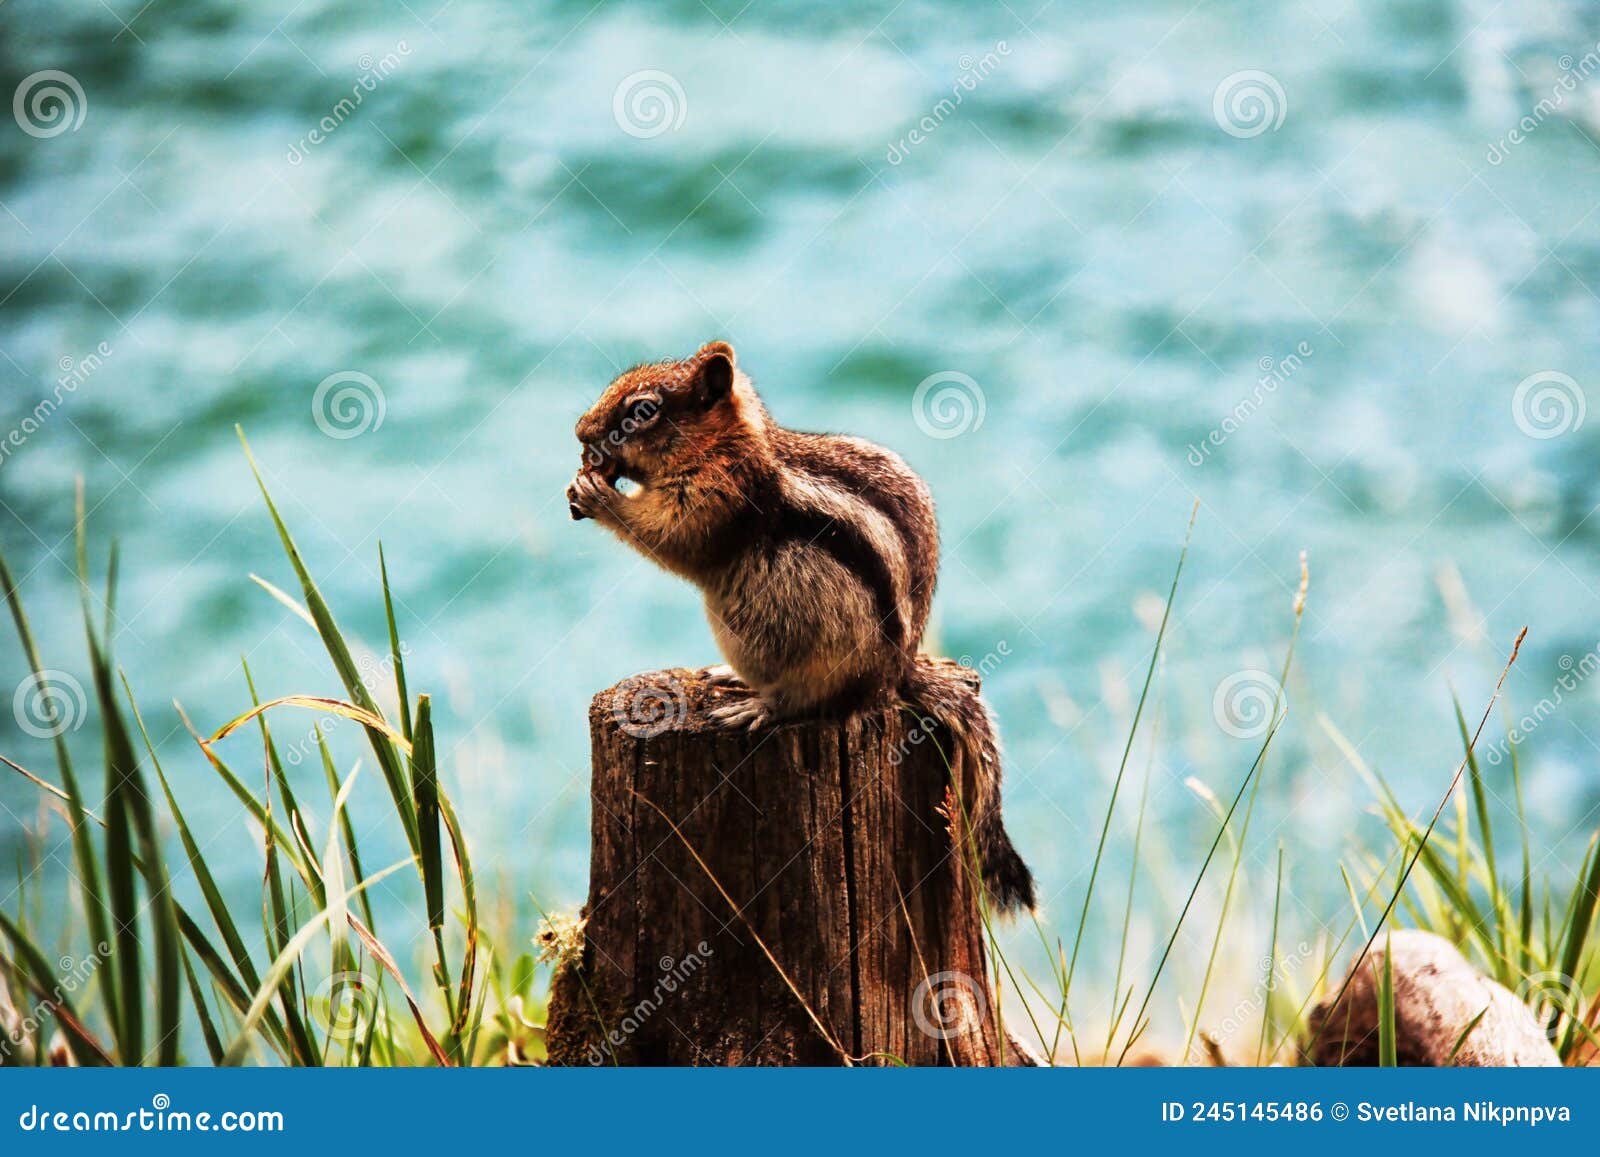 a colorado chipmunk sits on a stump and nibbles nuts